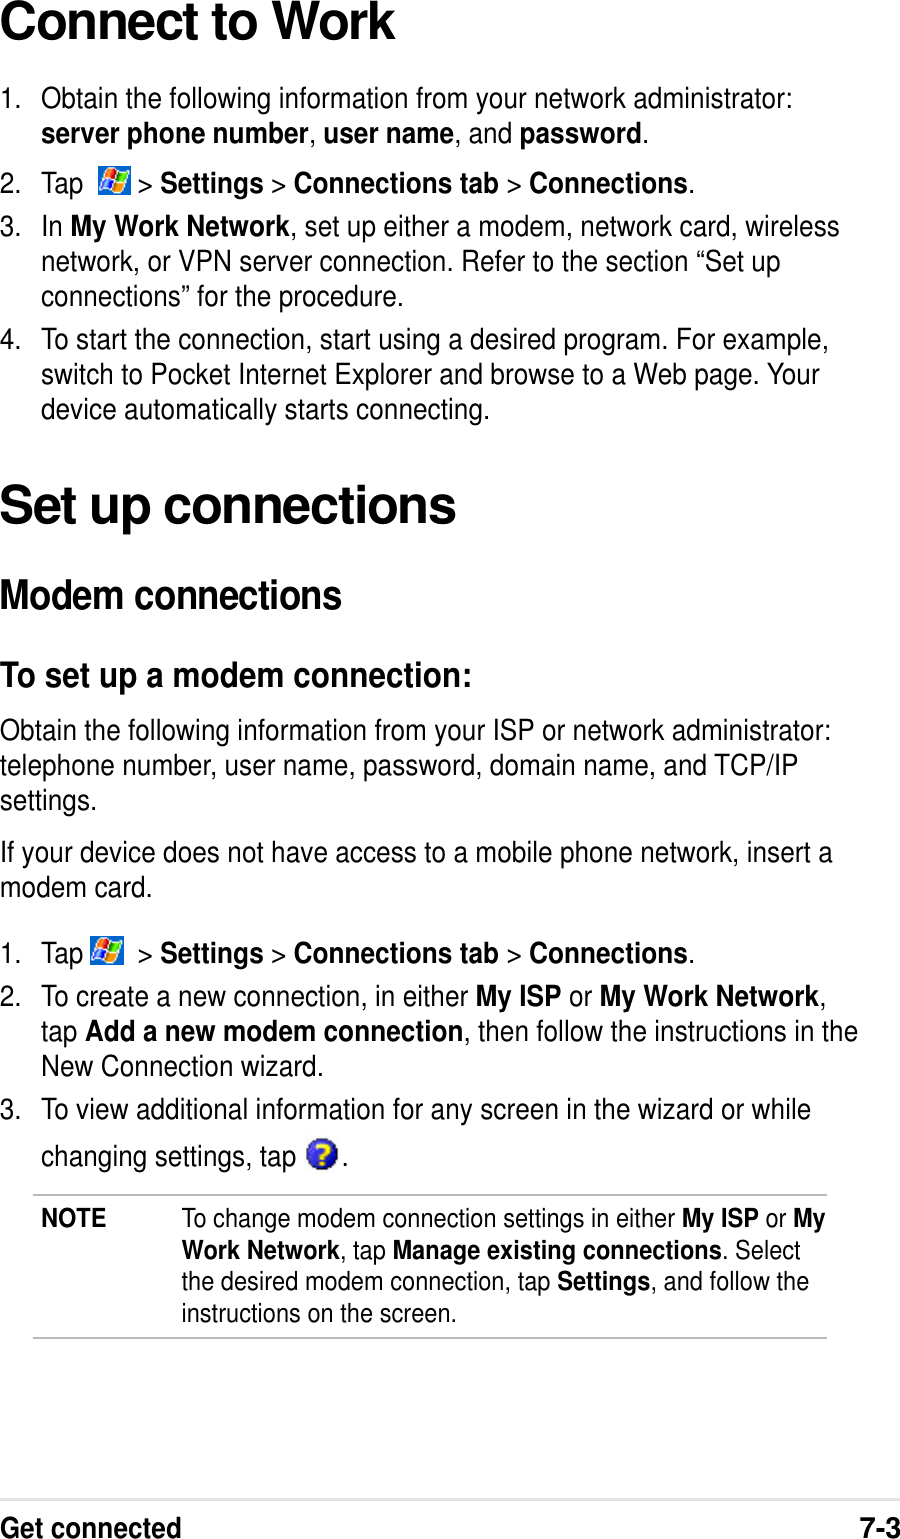 Get connected7-3Connect to Work1. Obtain the following information from your network administrator:server phone number,user name, and password.2. Tap    &gt; Settings &gt;Connections tab &gt;Connections.3. In My Work Network, set up either a modem, network card, wirelessnetwork, or VPN server connection. Refer to the section “Set upconnections” for the procedure.4. To start the connection, start using a desired program. For example,switch to Pocket Internet Explorer and browse to a Web page. Yourdevice automatically starts connecting.Set up connectionsModem connectionsTo set up a modem connection:Obtain the following information from your ISP or network administrator:telephone number, user name, password, domain name, and TCP/IPsettings.If your device does not have access to a mobile phone network, insert amodem card.1. Tap    &gt; Settings &gt;Connections tab &gt;Connections.2. To create a new connection, in either My ISP or My Work Network,tap Add a new modem connection, then follow the instructions in theNew Connection wizard.3. To view additional information for any screen in the wizard or whilechanging settings, tap  .NOTE To change modem connection settings in either My ISP or MyWork Network, tap Manage existing connections. Selectthe desired modem connection, tap Settings, and follow theinstructions on the screen.